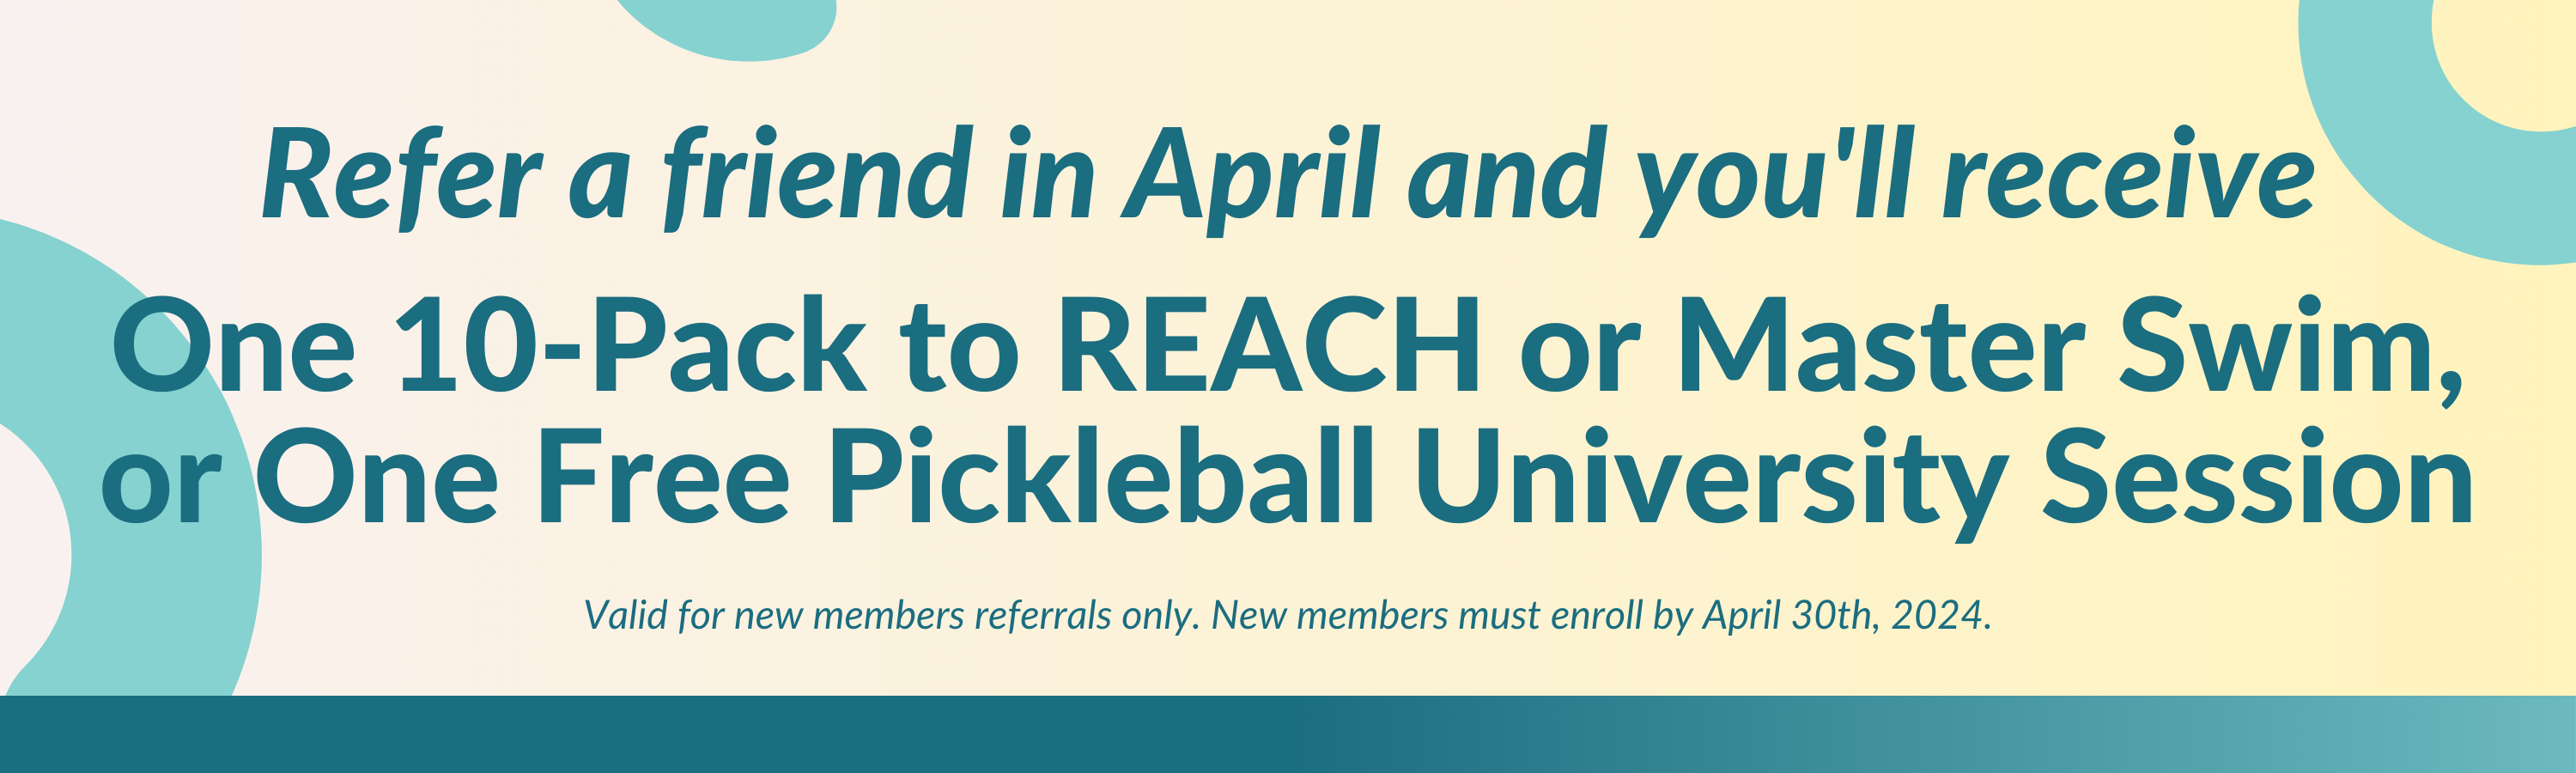 Wheaton Sport Center April Refer a Friend, you'll receive one 10-pack to reach or masters swim or One free pickleball University Session